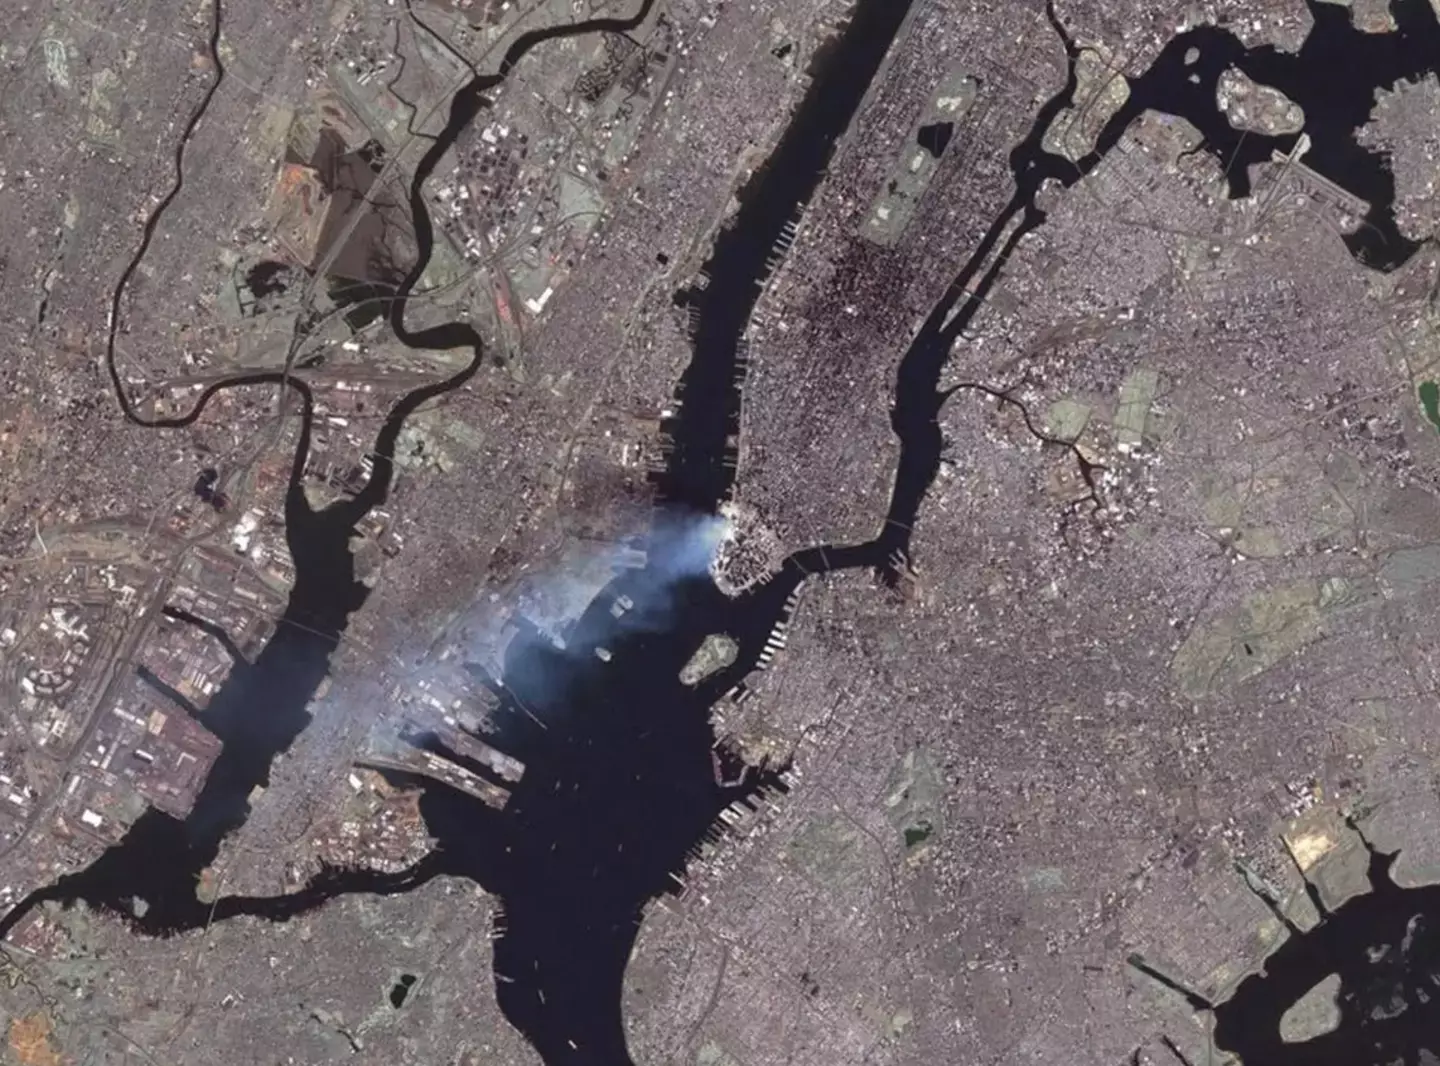 The astronaut could see the devastating terrorist attack all the way from space.